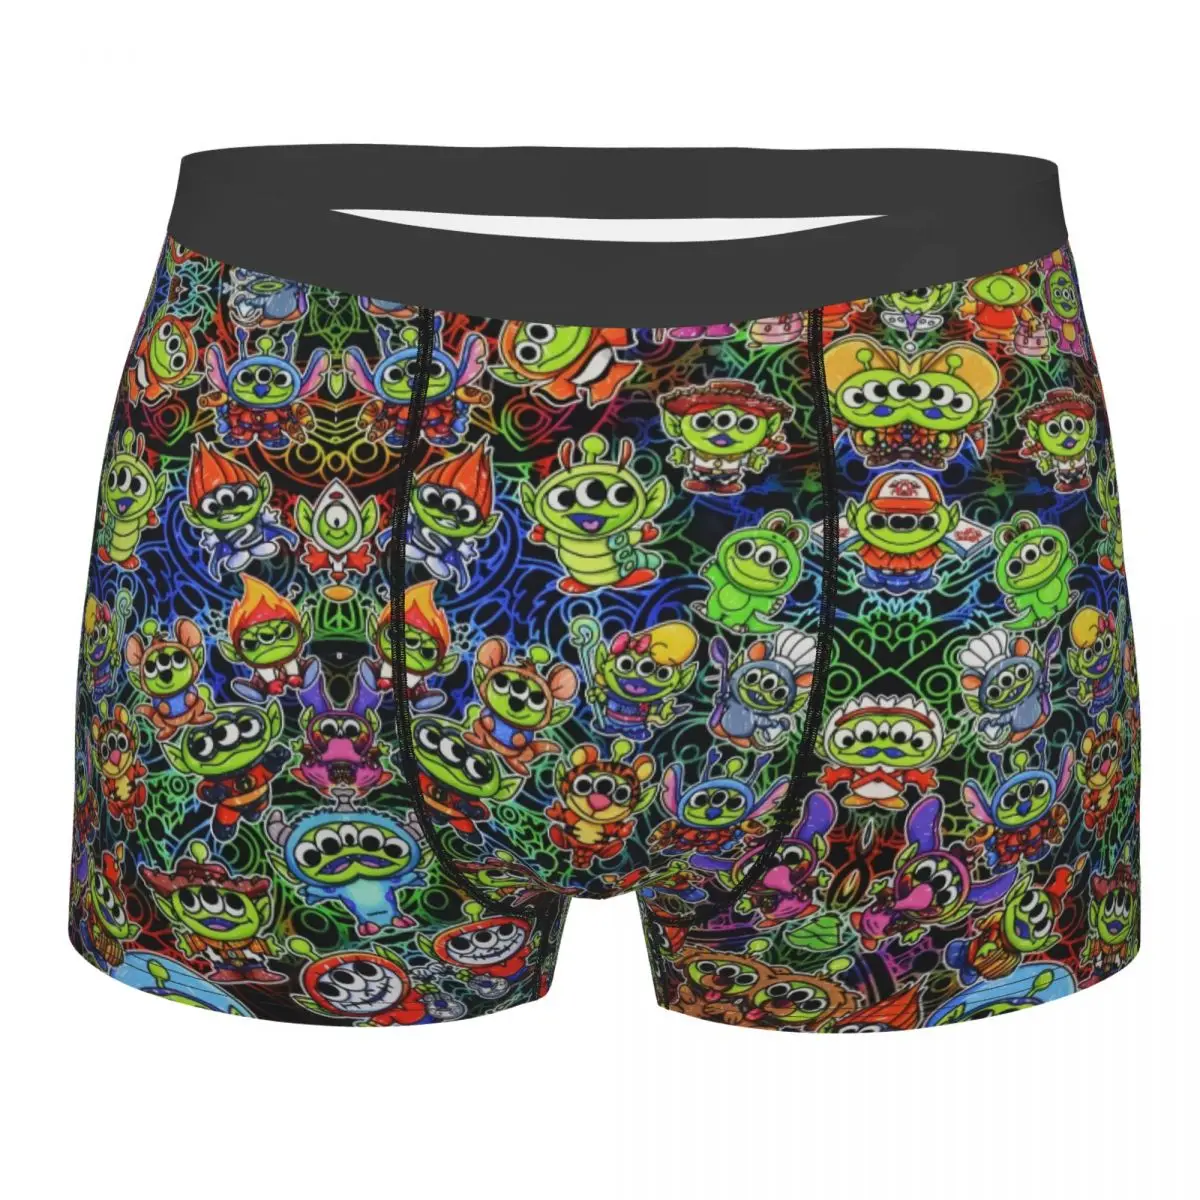 

Disney Toy Story Movies Boxer Shorts For Homme 3D Print Anime Comedy Underwear Panties Briefs Soft Underpants